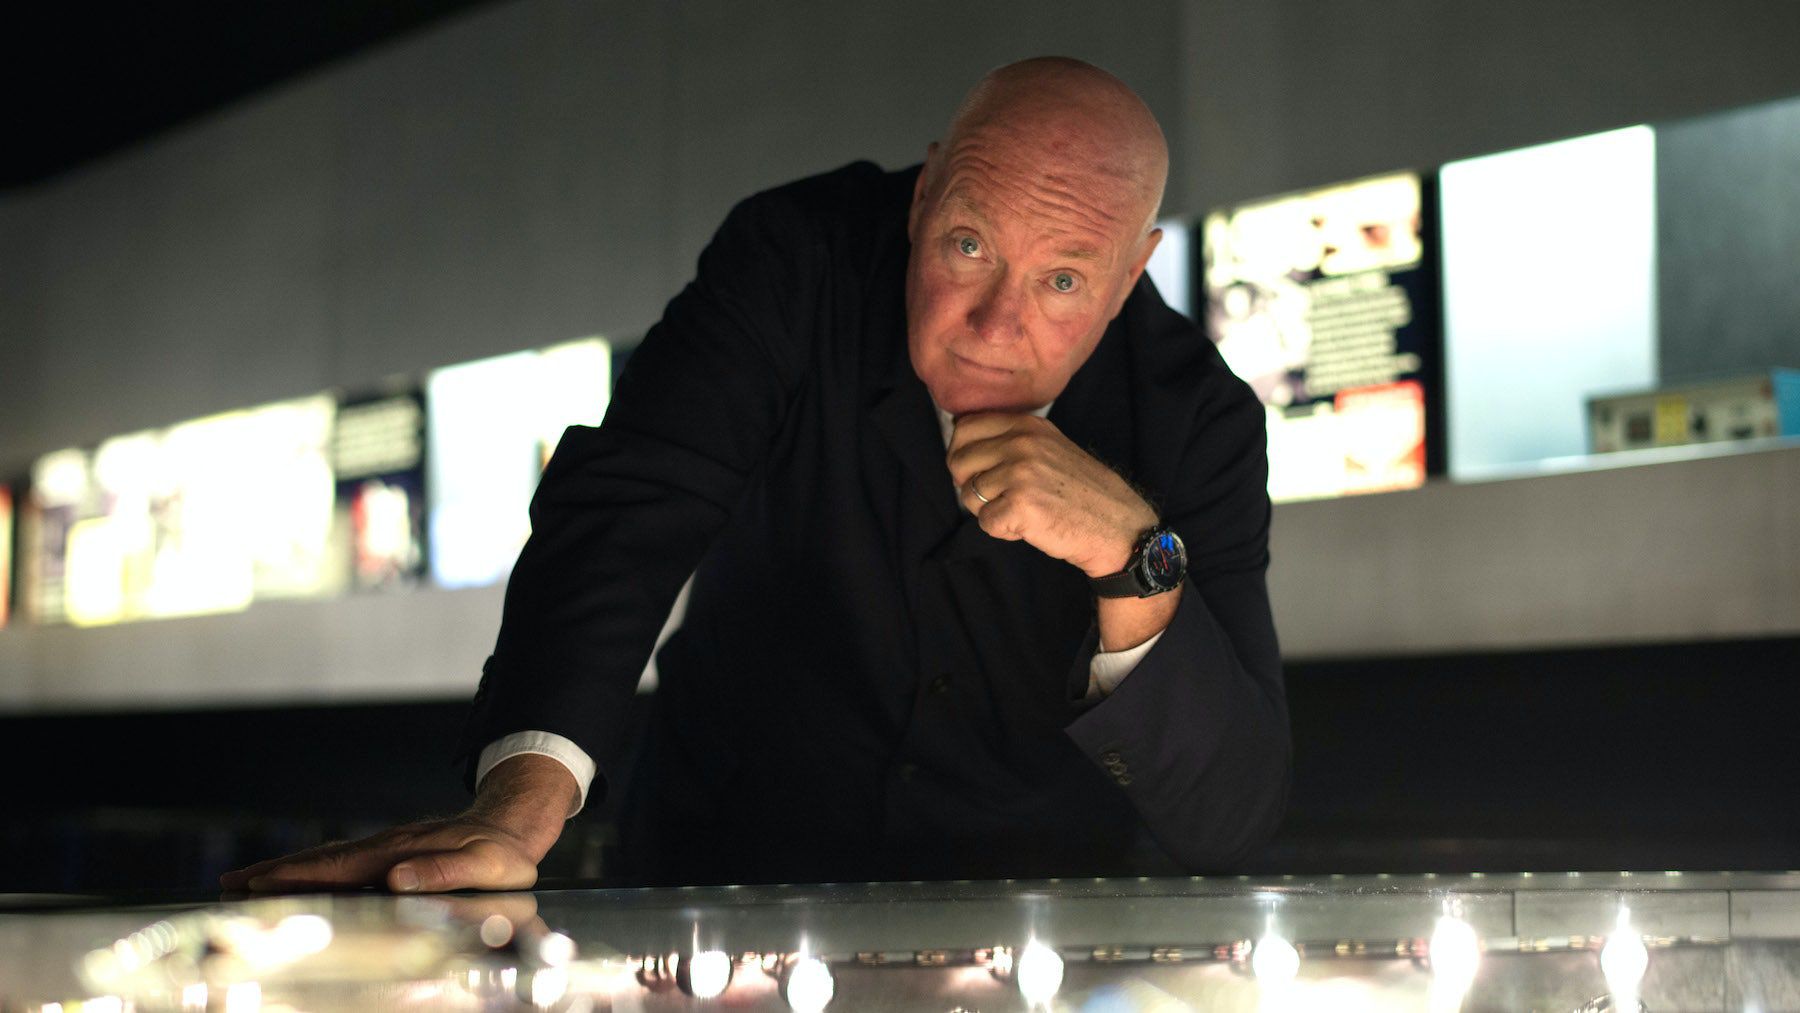 Jean-Claude Biver, currently President of Hublot, will also take  responsibility for the watch brands TAG Heuer and Zenith –